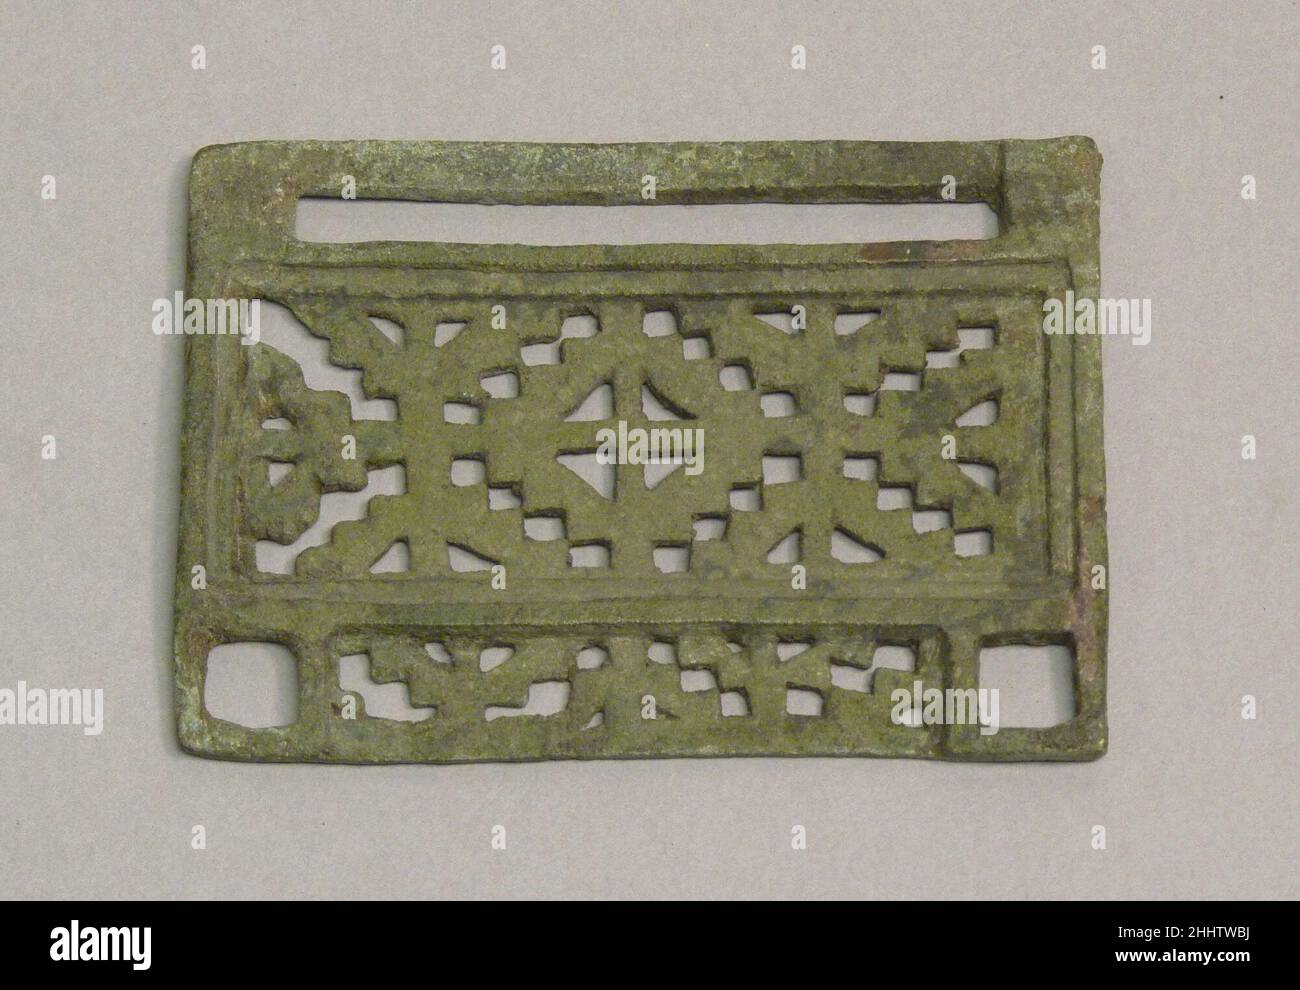 Buckle 500 B.C.–A.D. 300 Vietnam (North). Buckle. Vietnam (North). 500 B.C.–A.D. 300. Bronze. Bronze and Iron Age period, Dongson culture. Jewelry Stock Photo